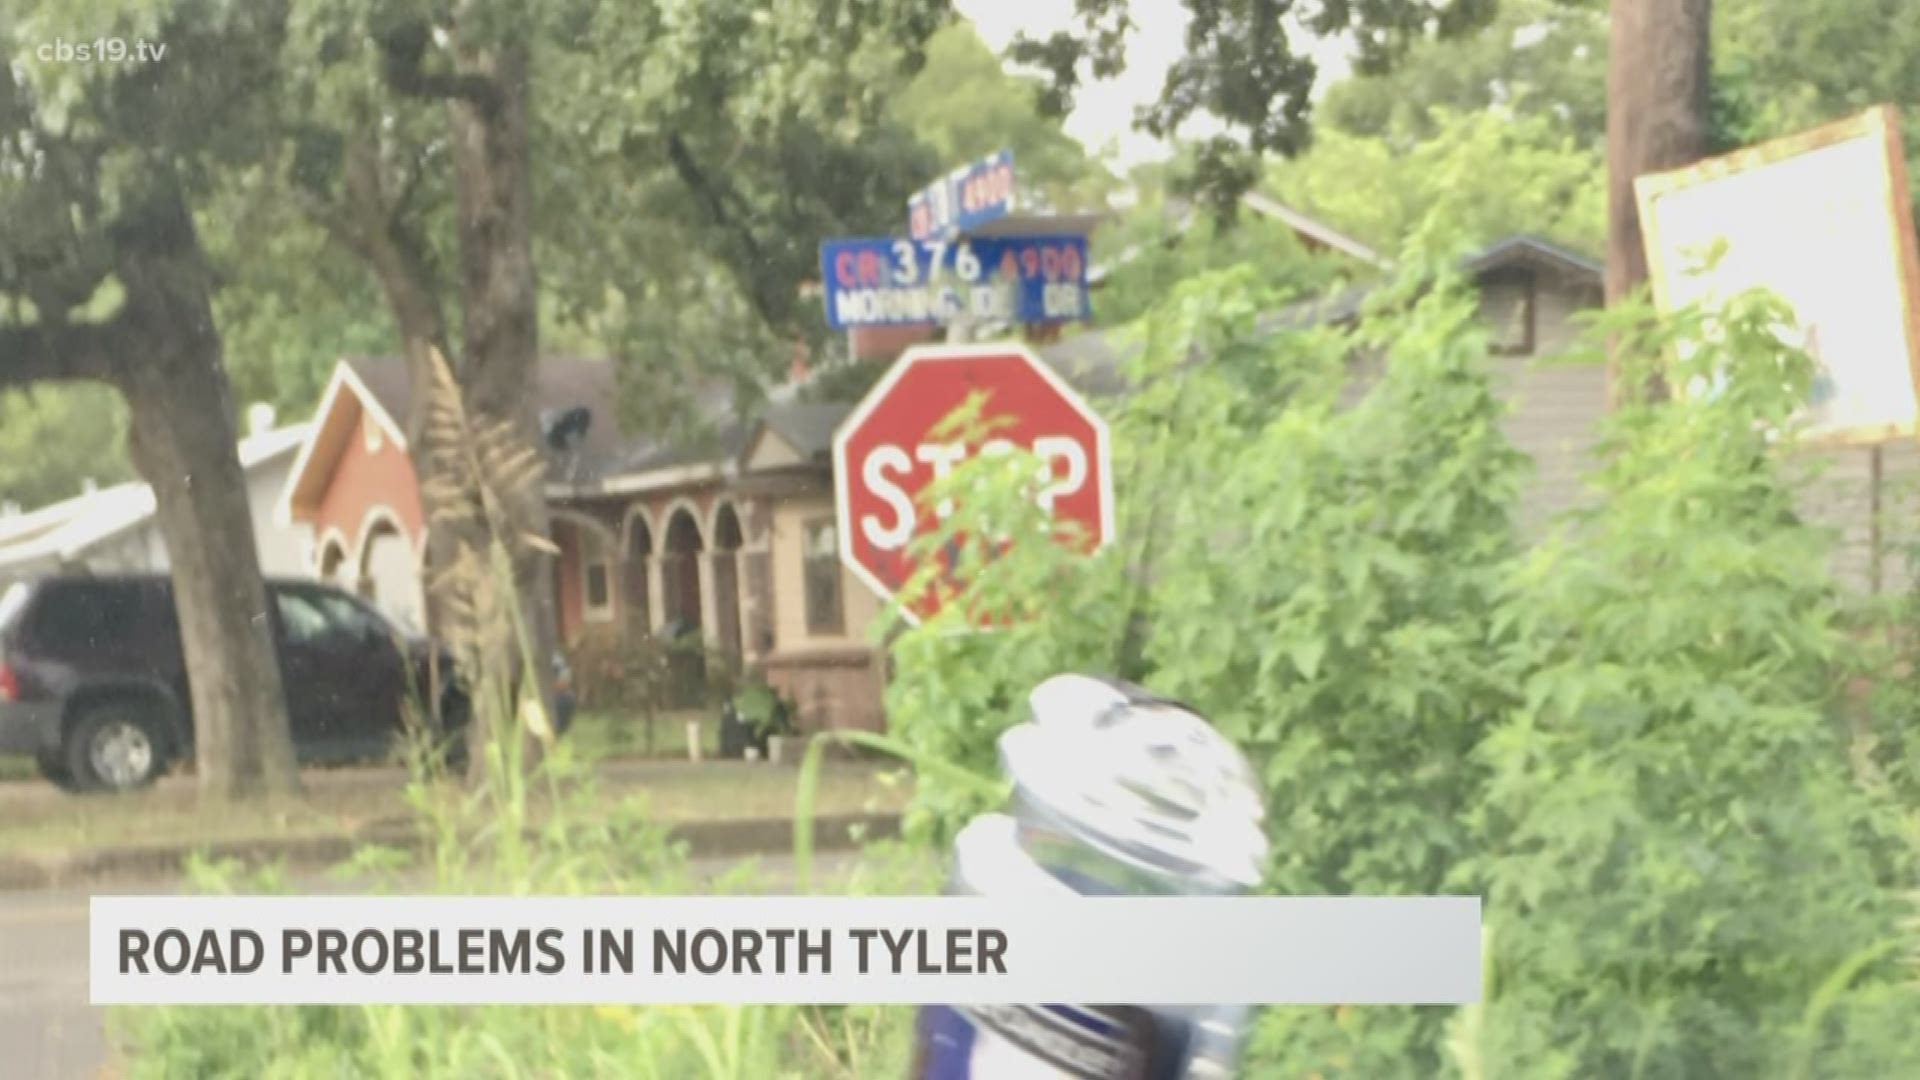 A viewer reached out to us asking for help with potholes in north Tyler.